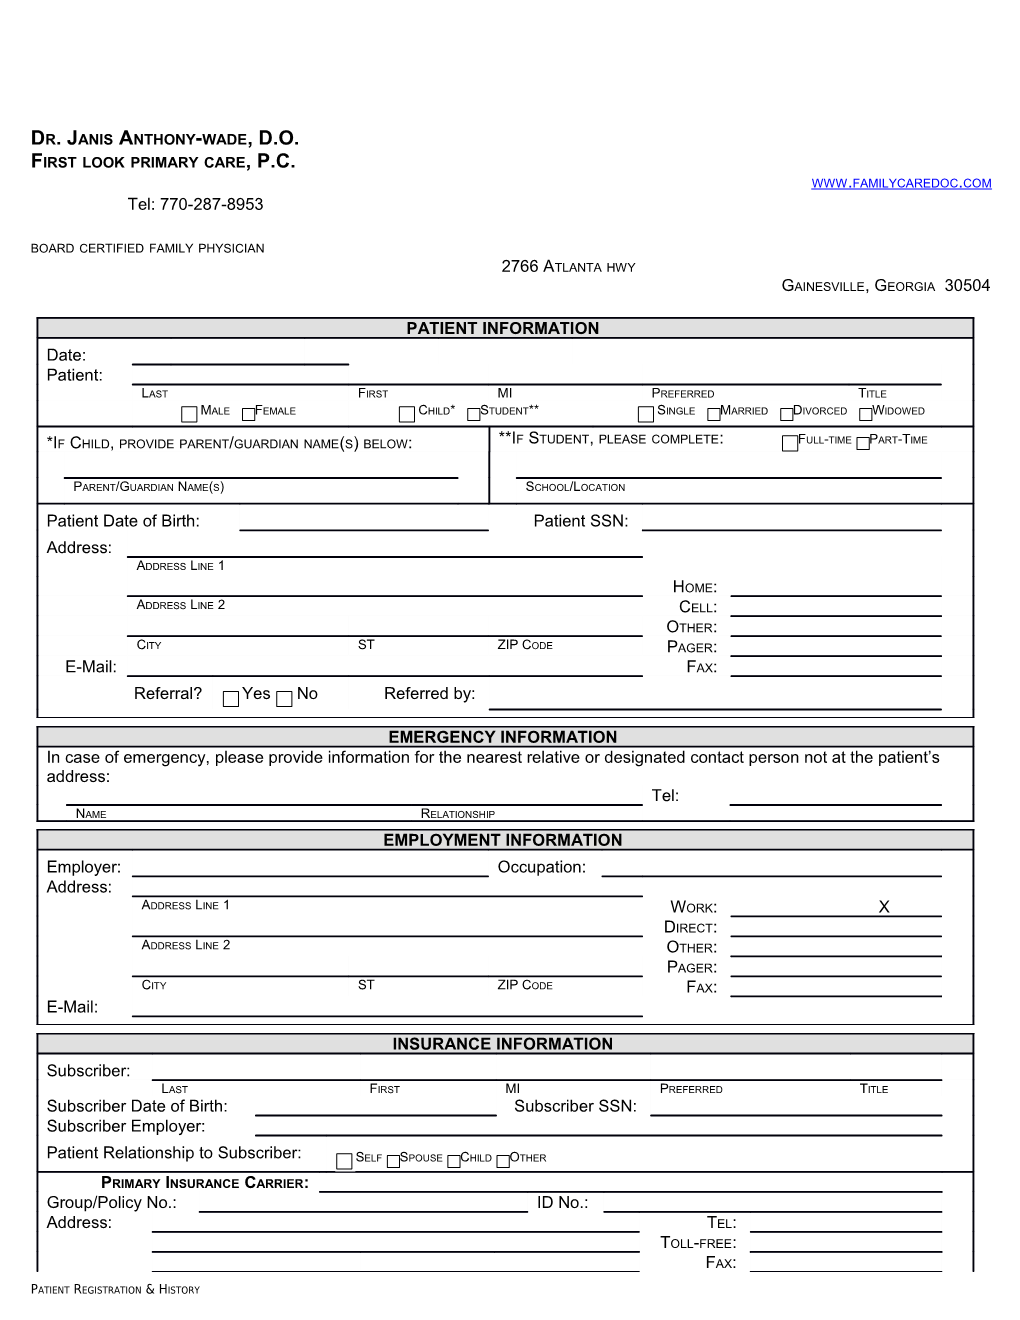 Template - Forms - Patient Registration & History